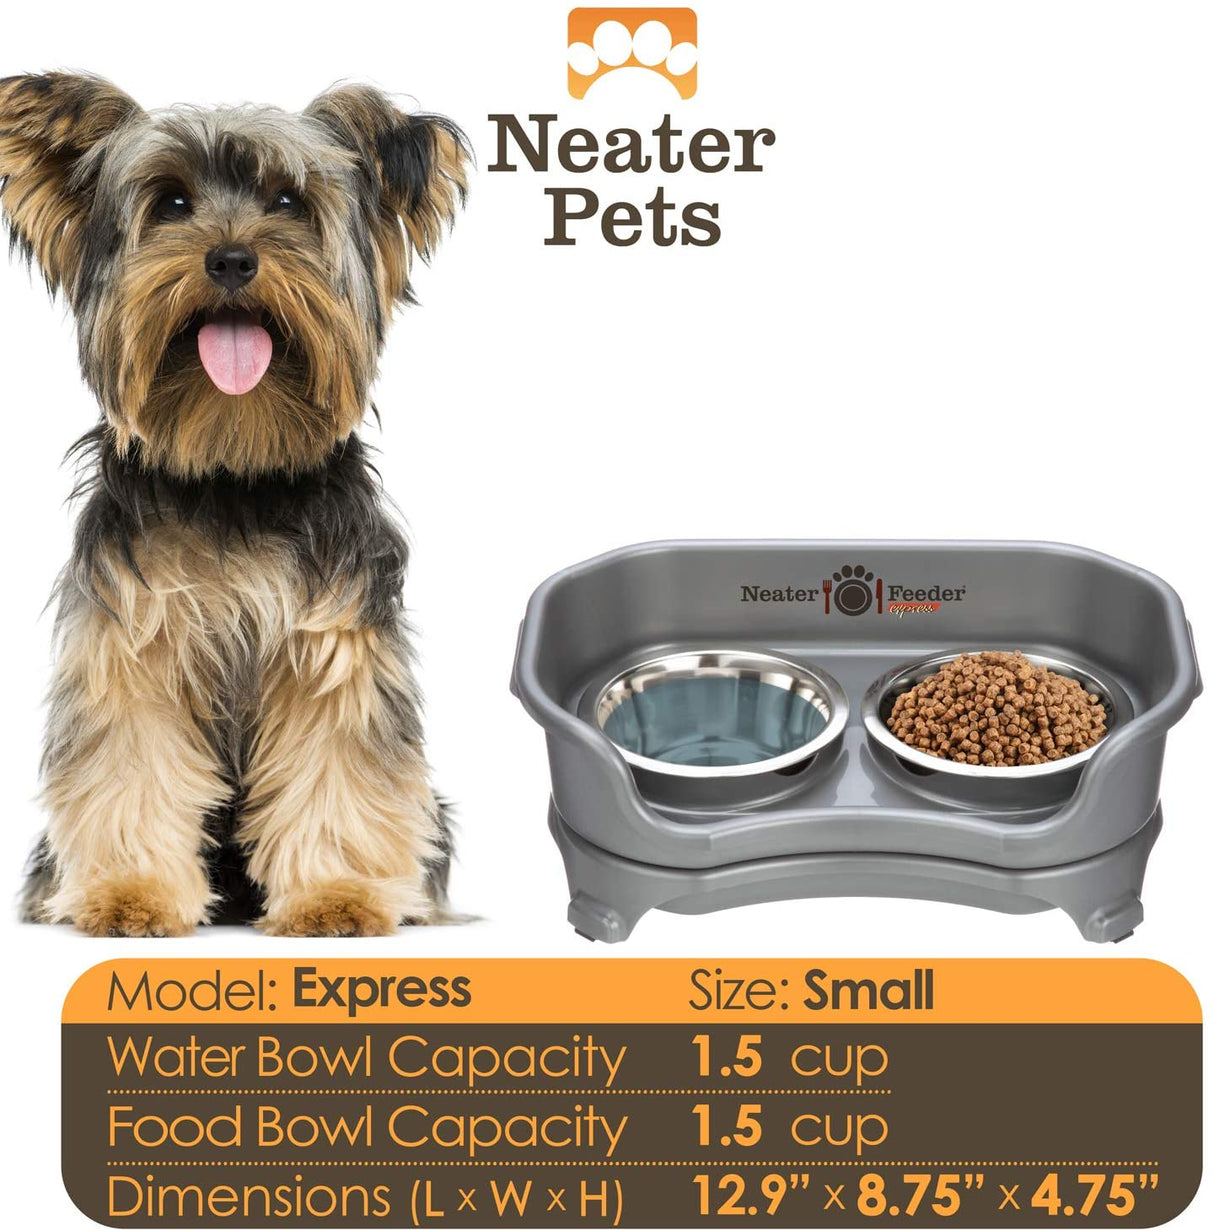 Elevated Dog Bowl for Small Breeds